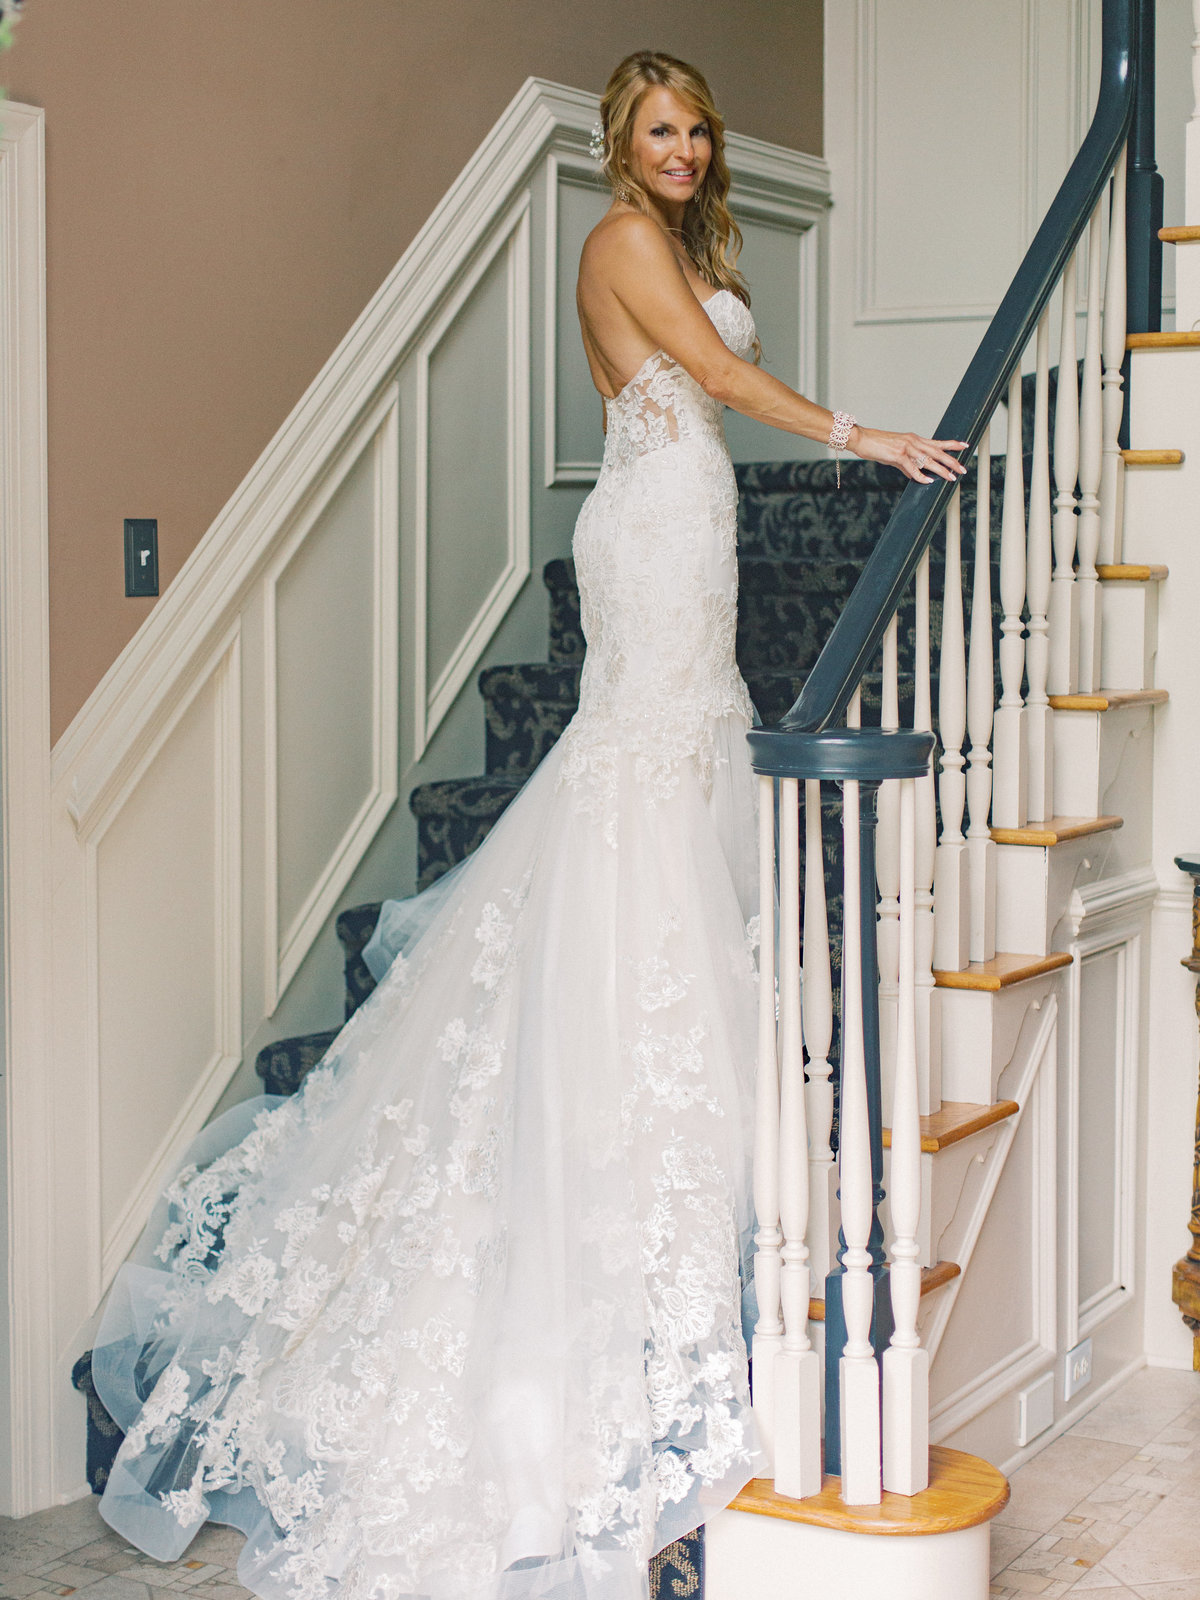 2019-06-08Carrie&MikeWedding-41